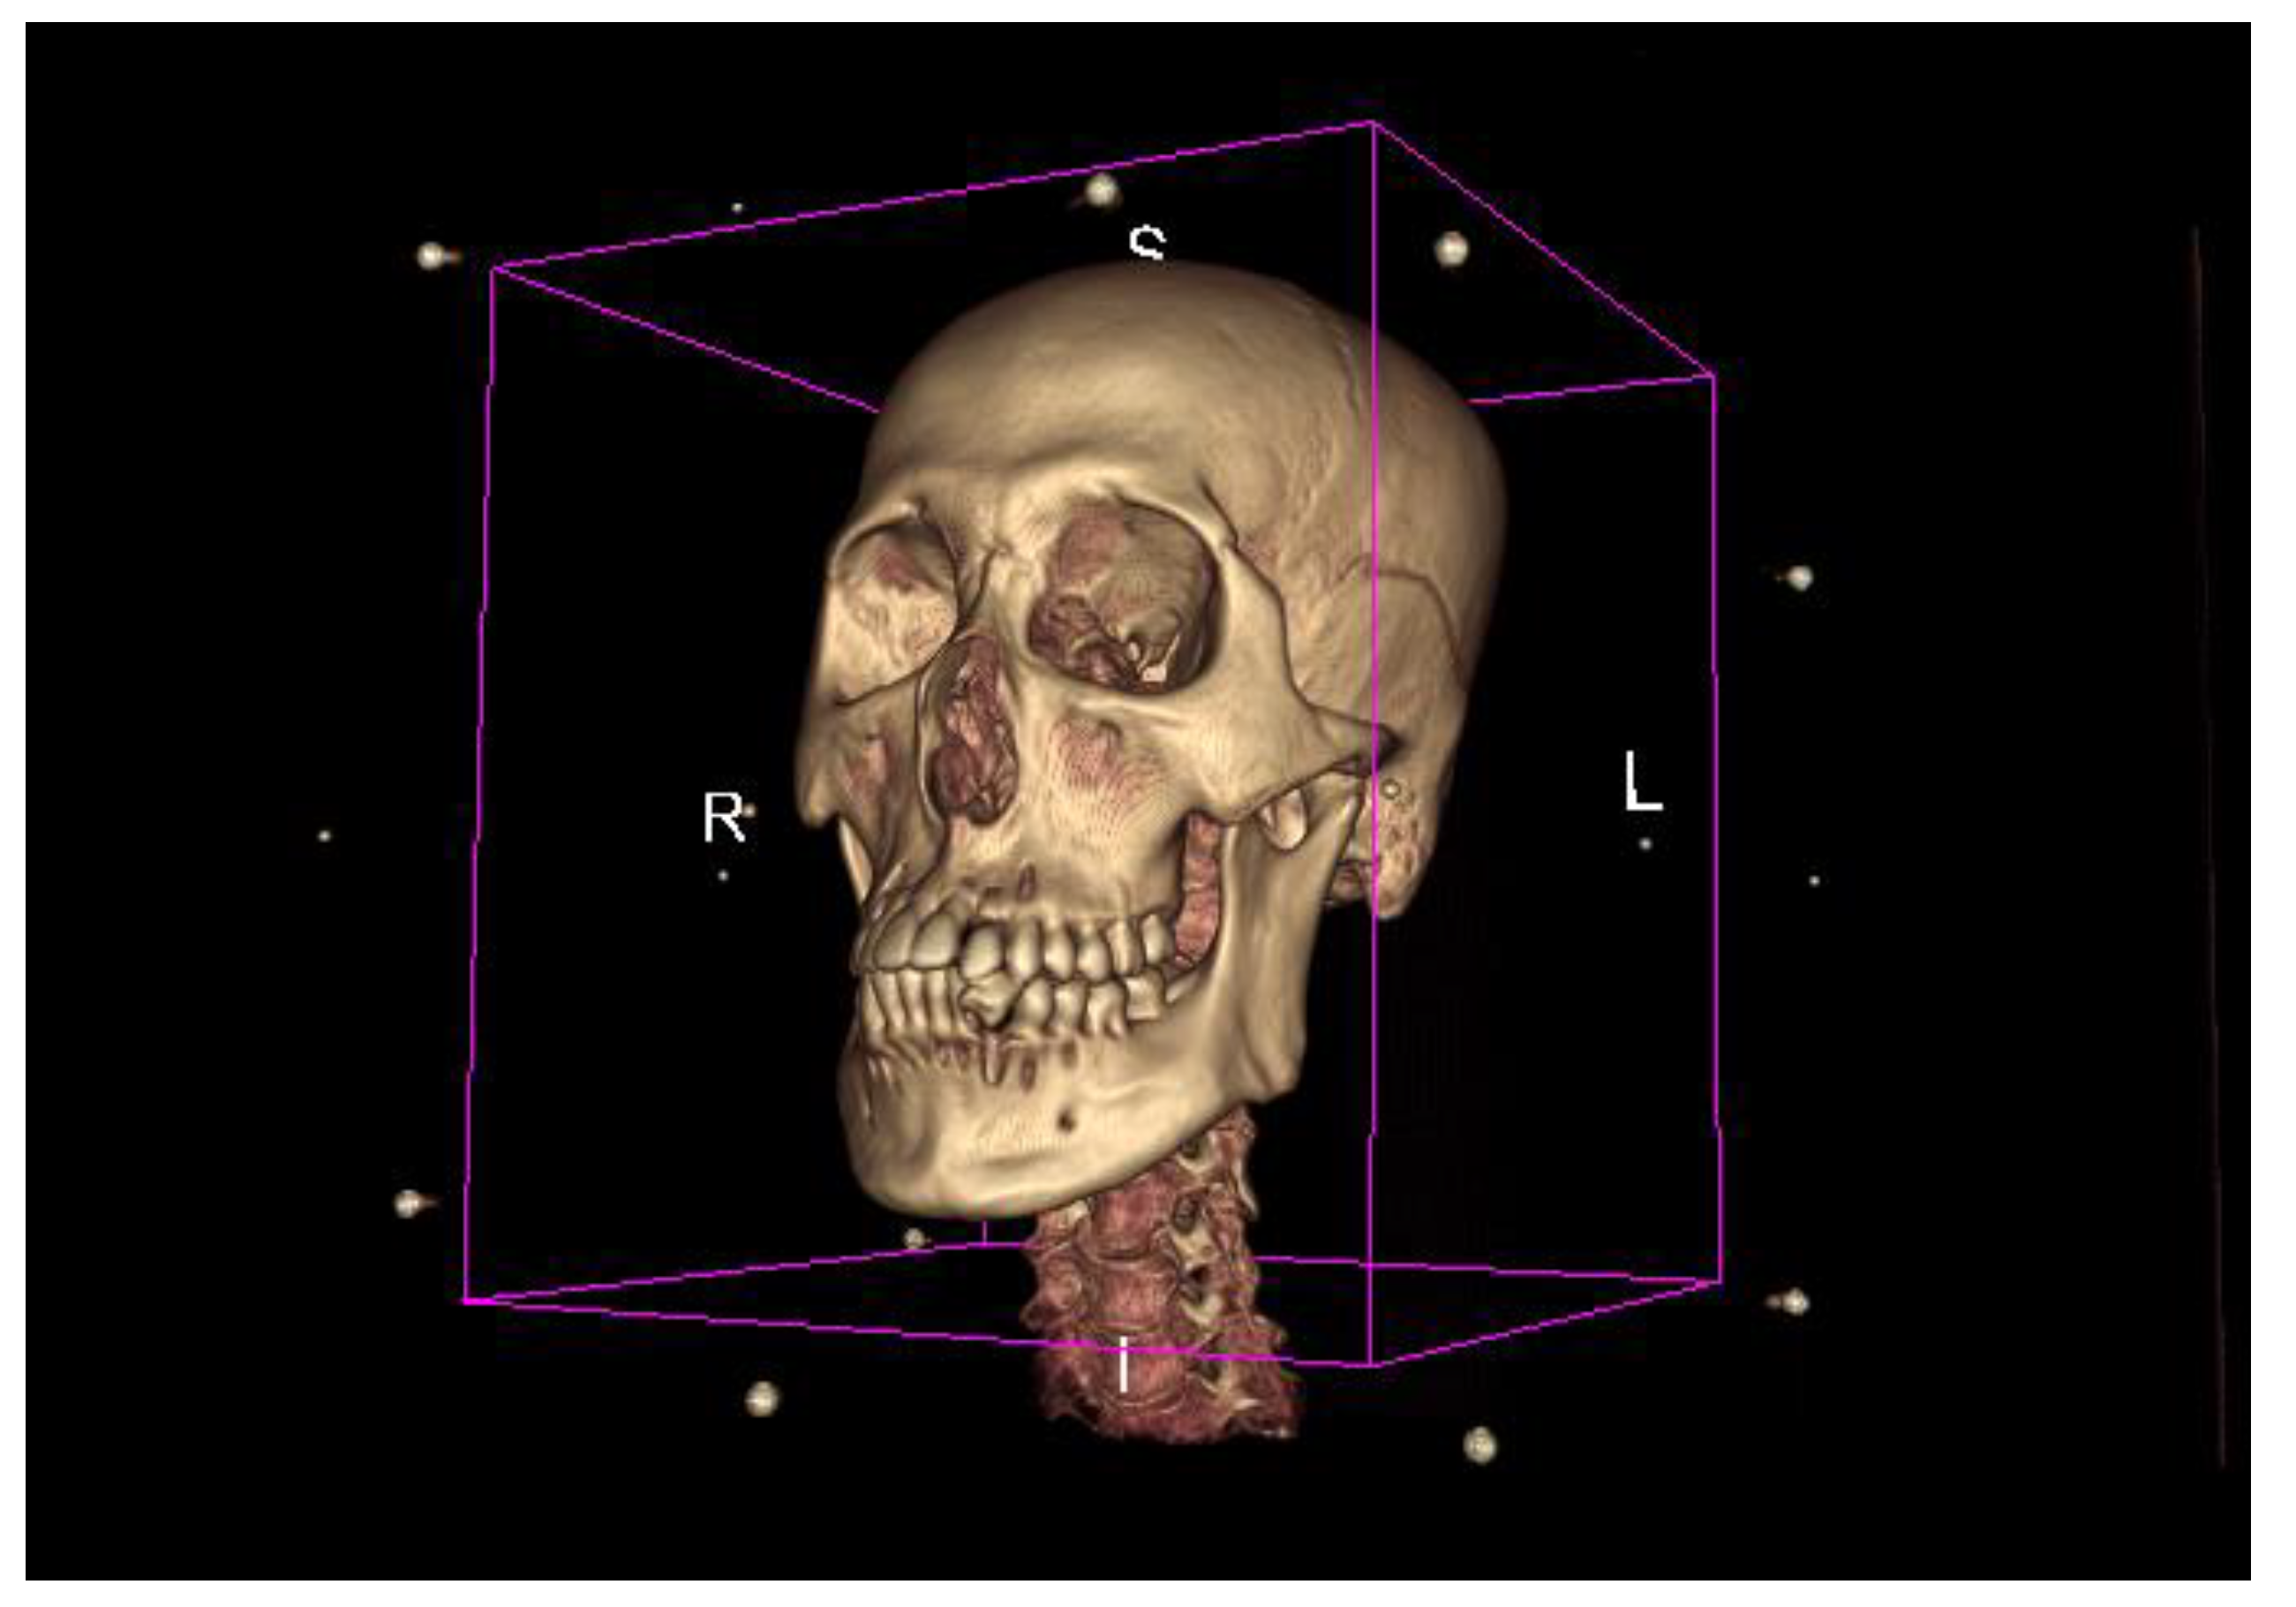 Applied Sciences | Free Full-Text | 2D/3D Multimode Medical Image Registration Based on Normalized Cross-Correlation | HTML